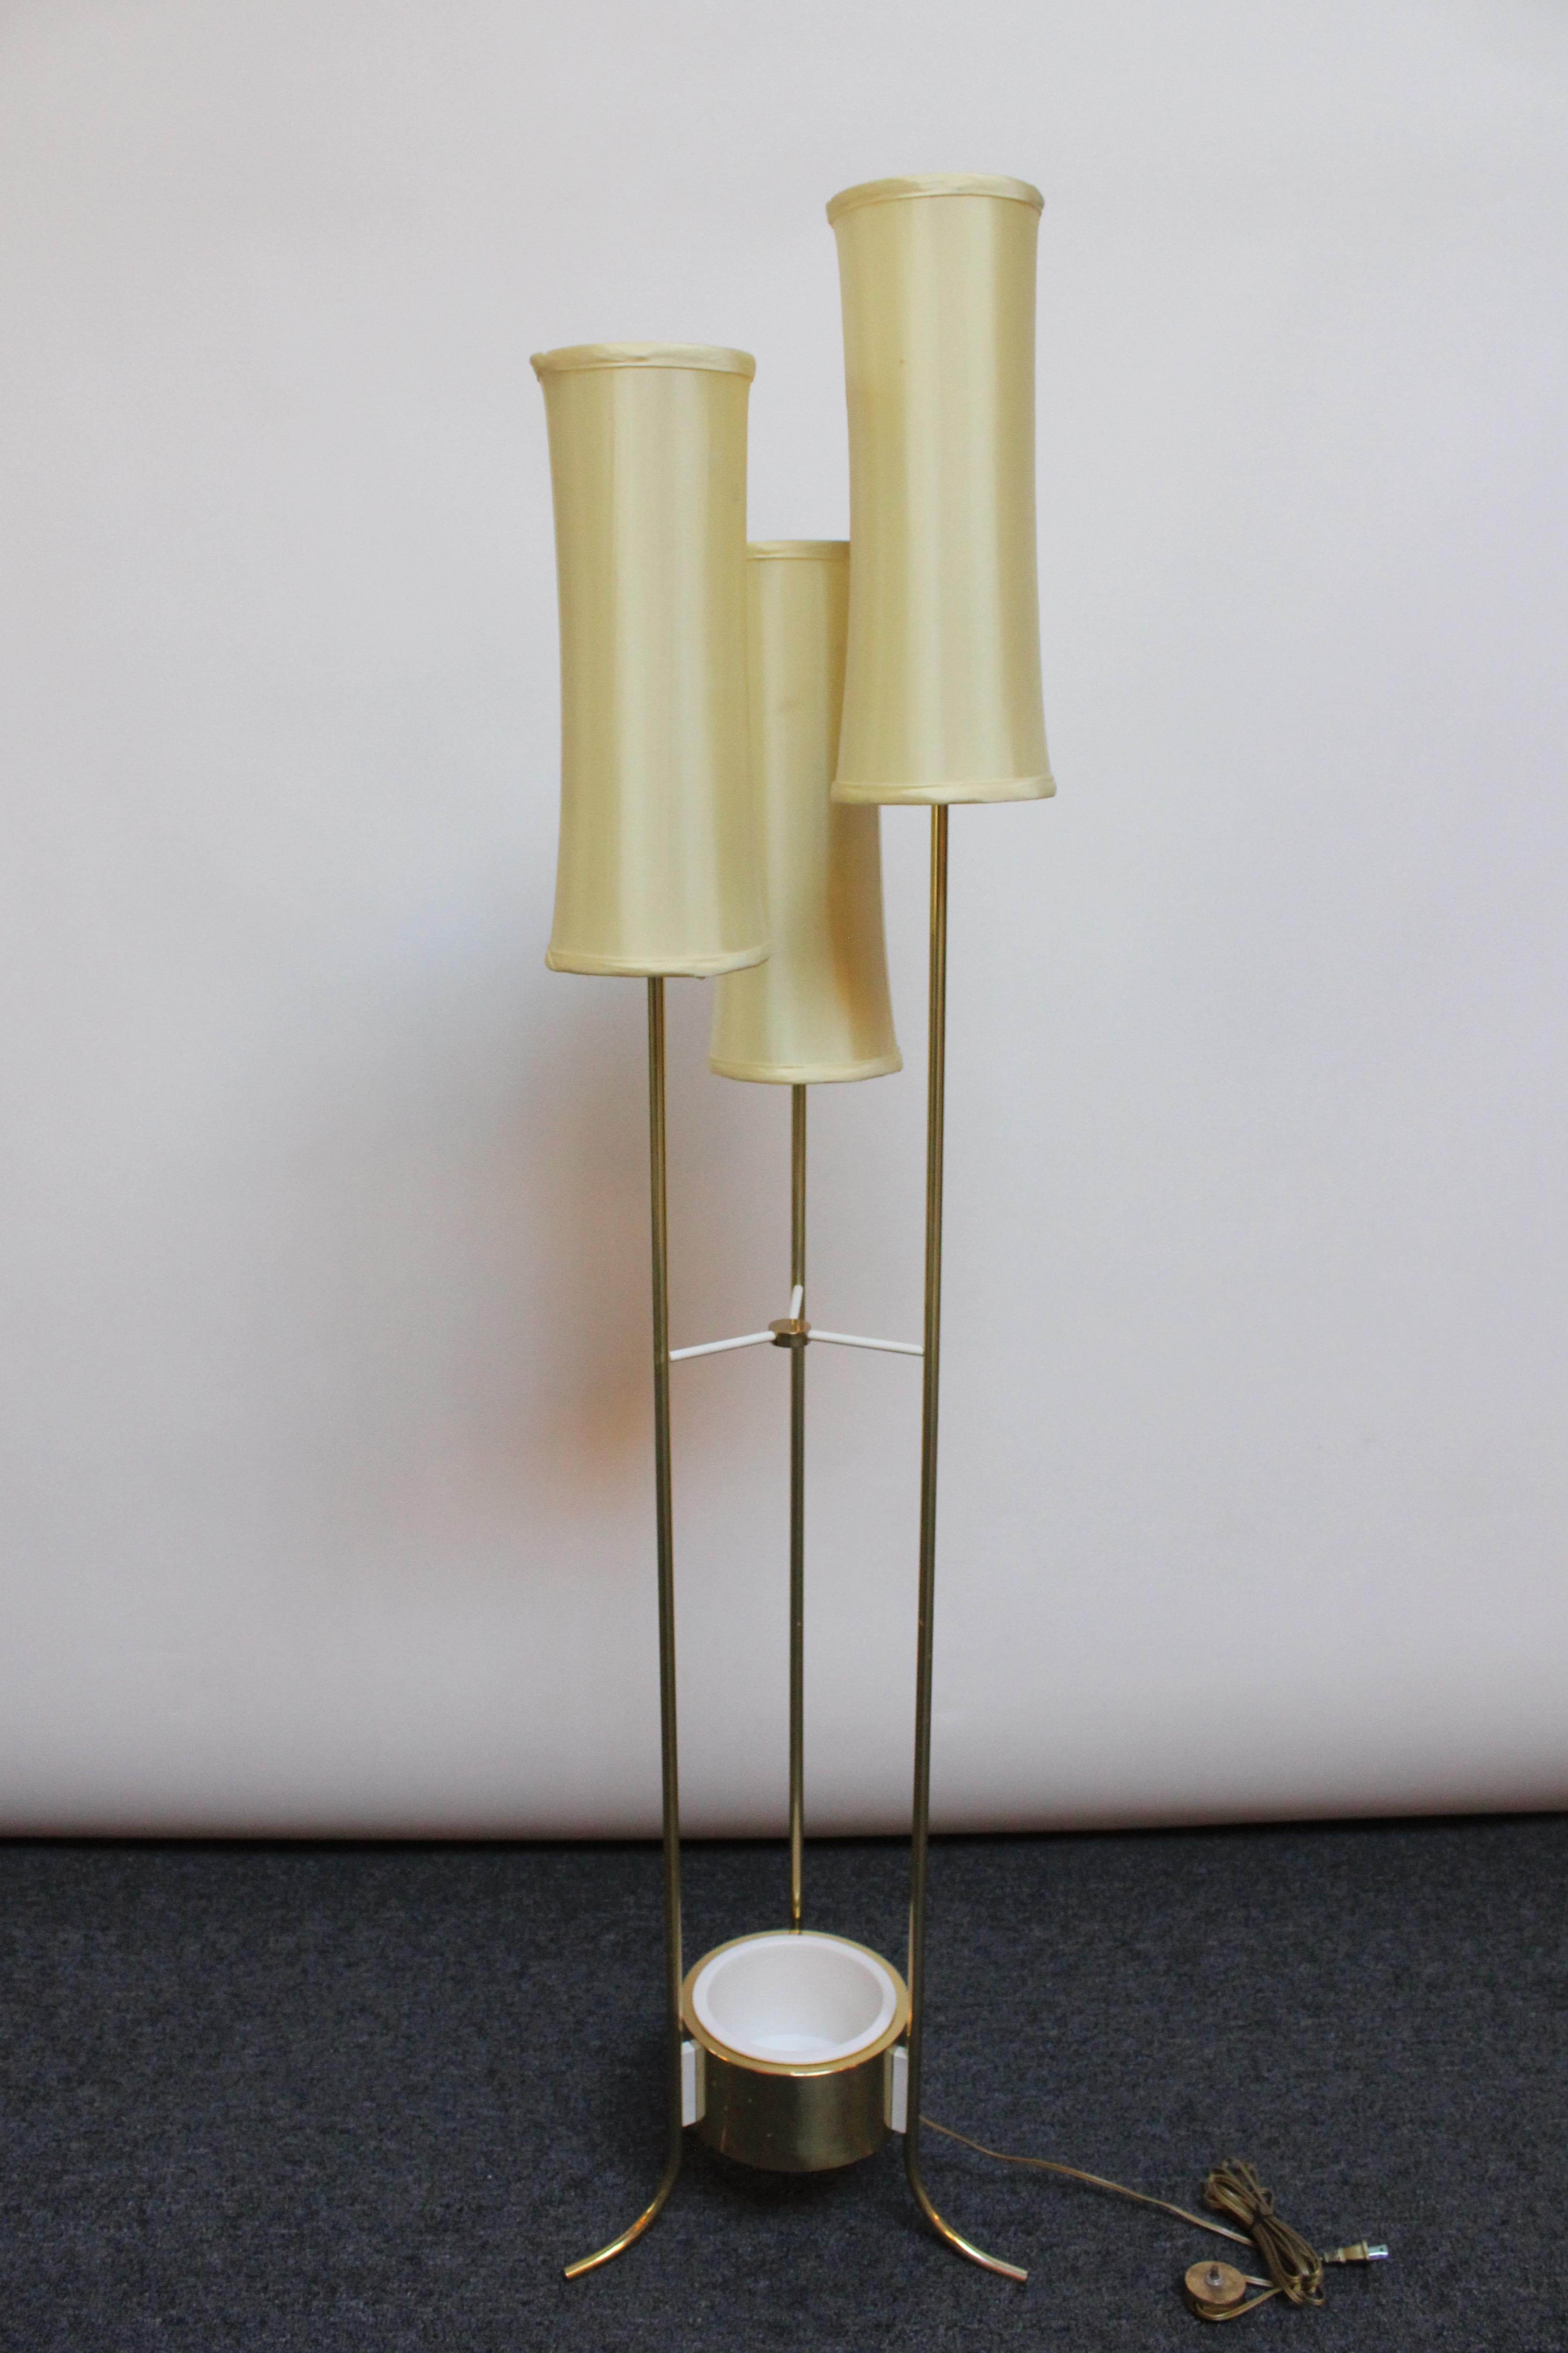 Three-fixture brass floor lamp with painted metal accents and a white ceramic insert planter. Vintage linen shades are included, though not original to the piece. 
Includes original brass on / off foot pedal. 
Brass shows light wear, as pictured,